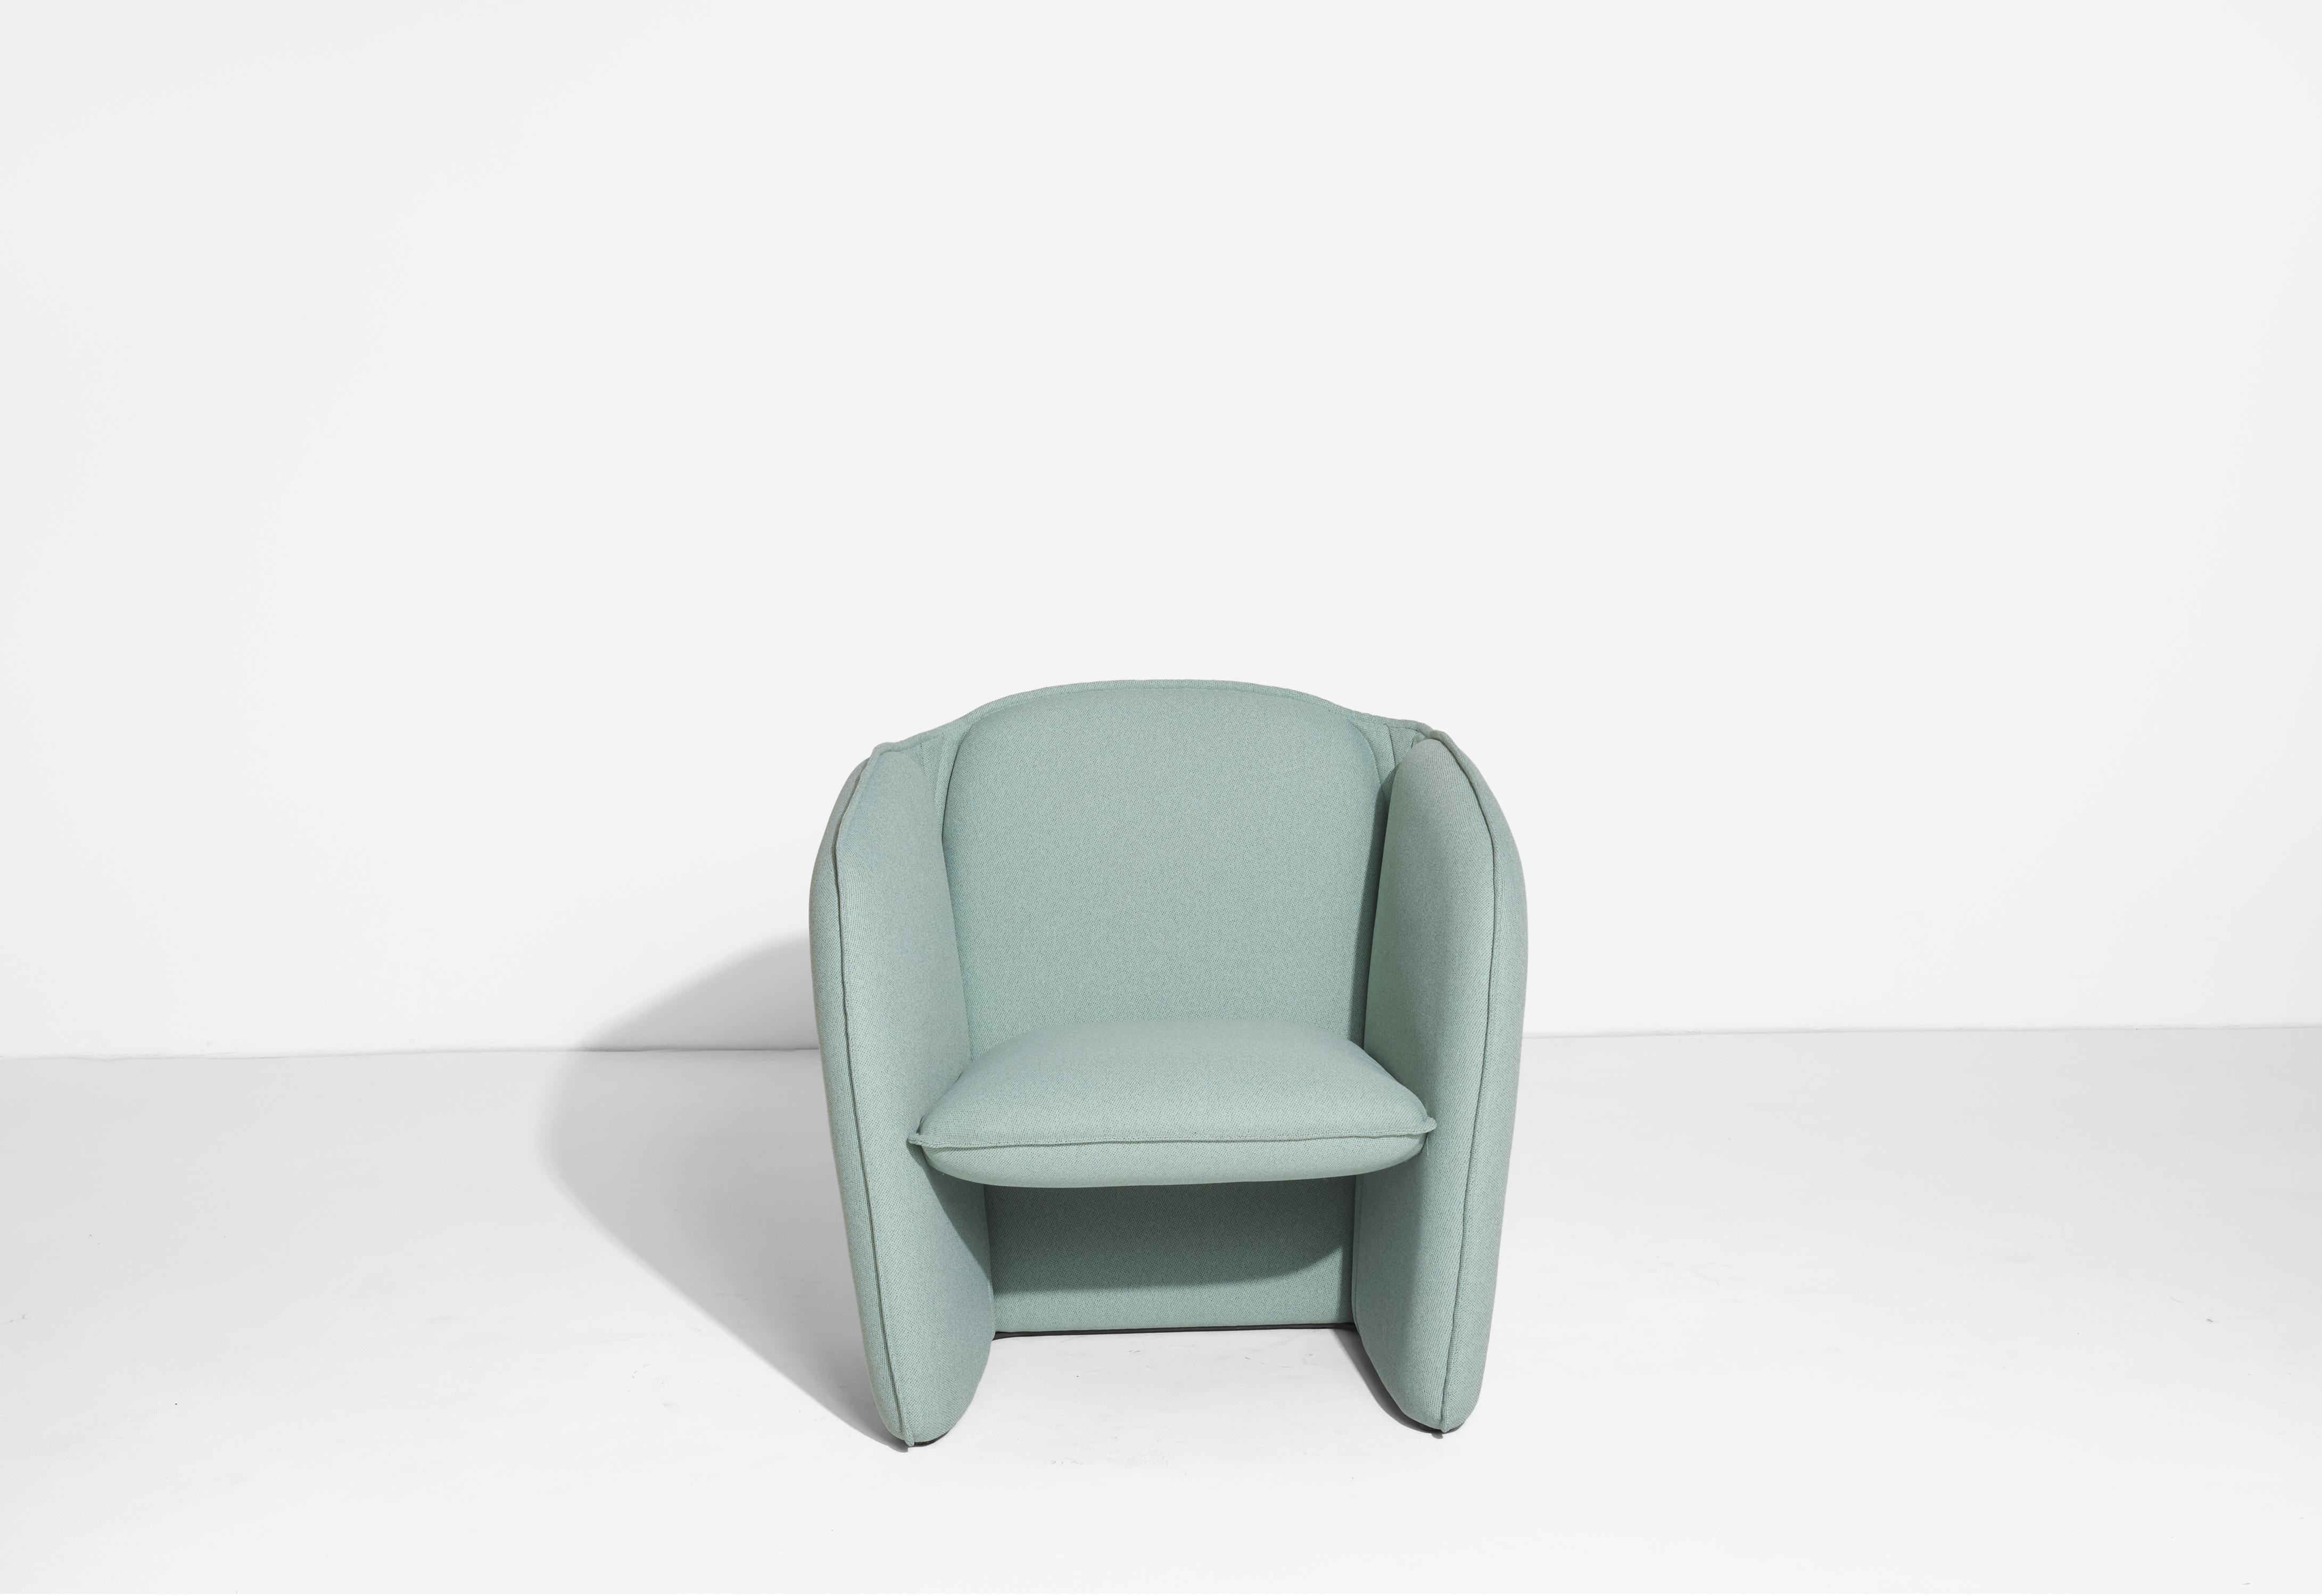 Petite Friture Lily Armchair in Light Blue by Färg & Blanche, 2022 In New Condition For Sale In Brooklyn, NY